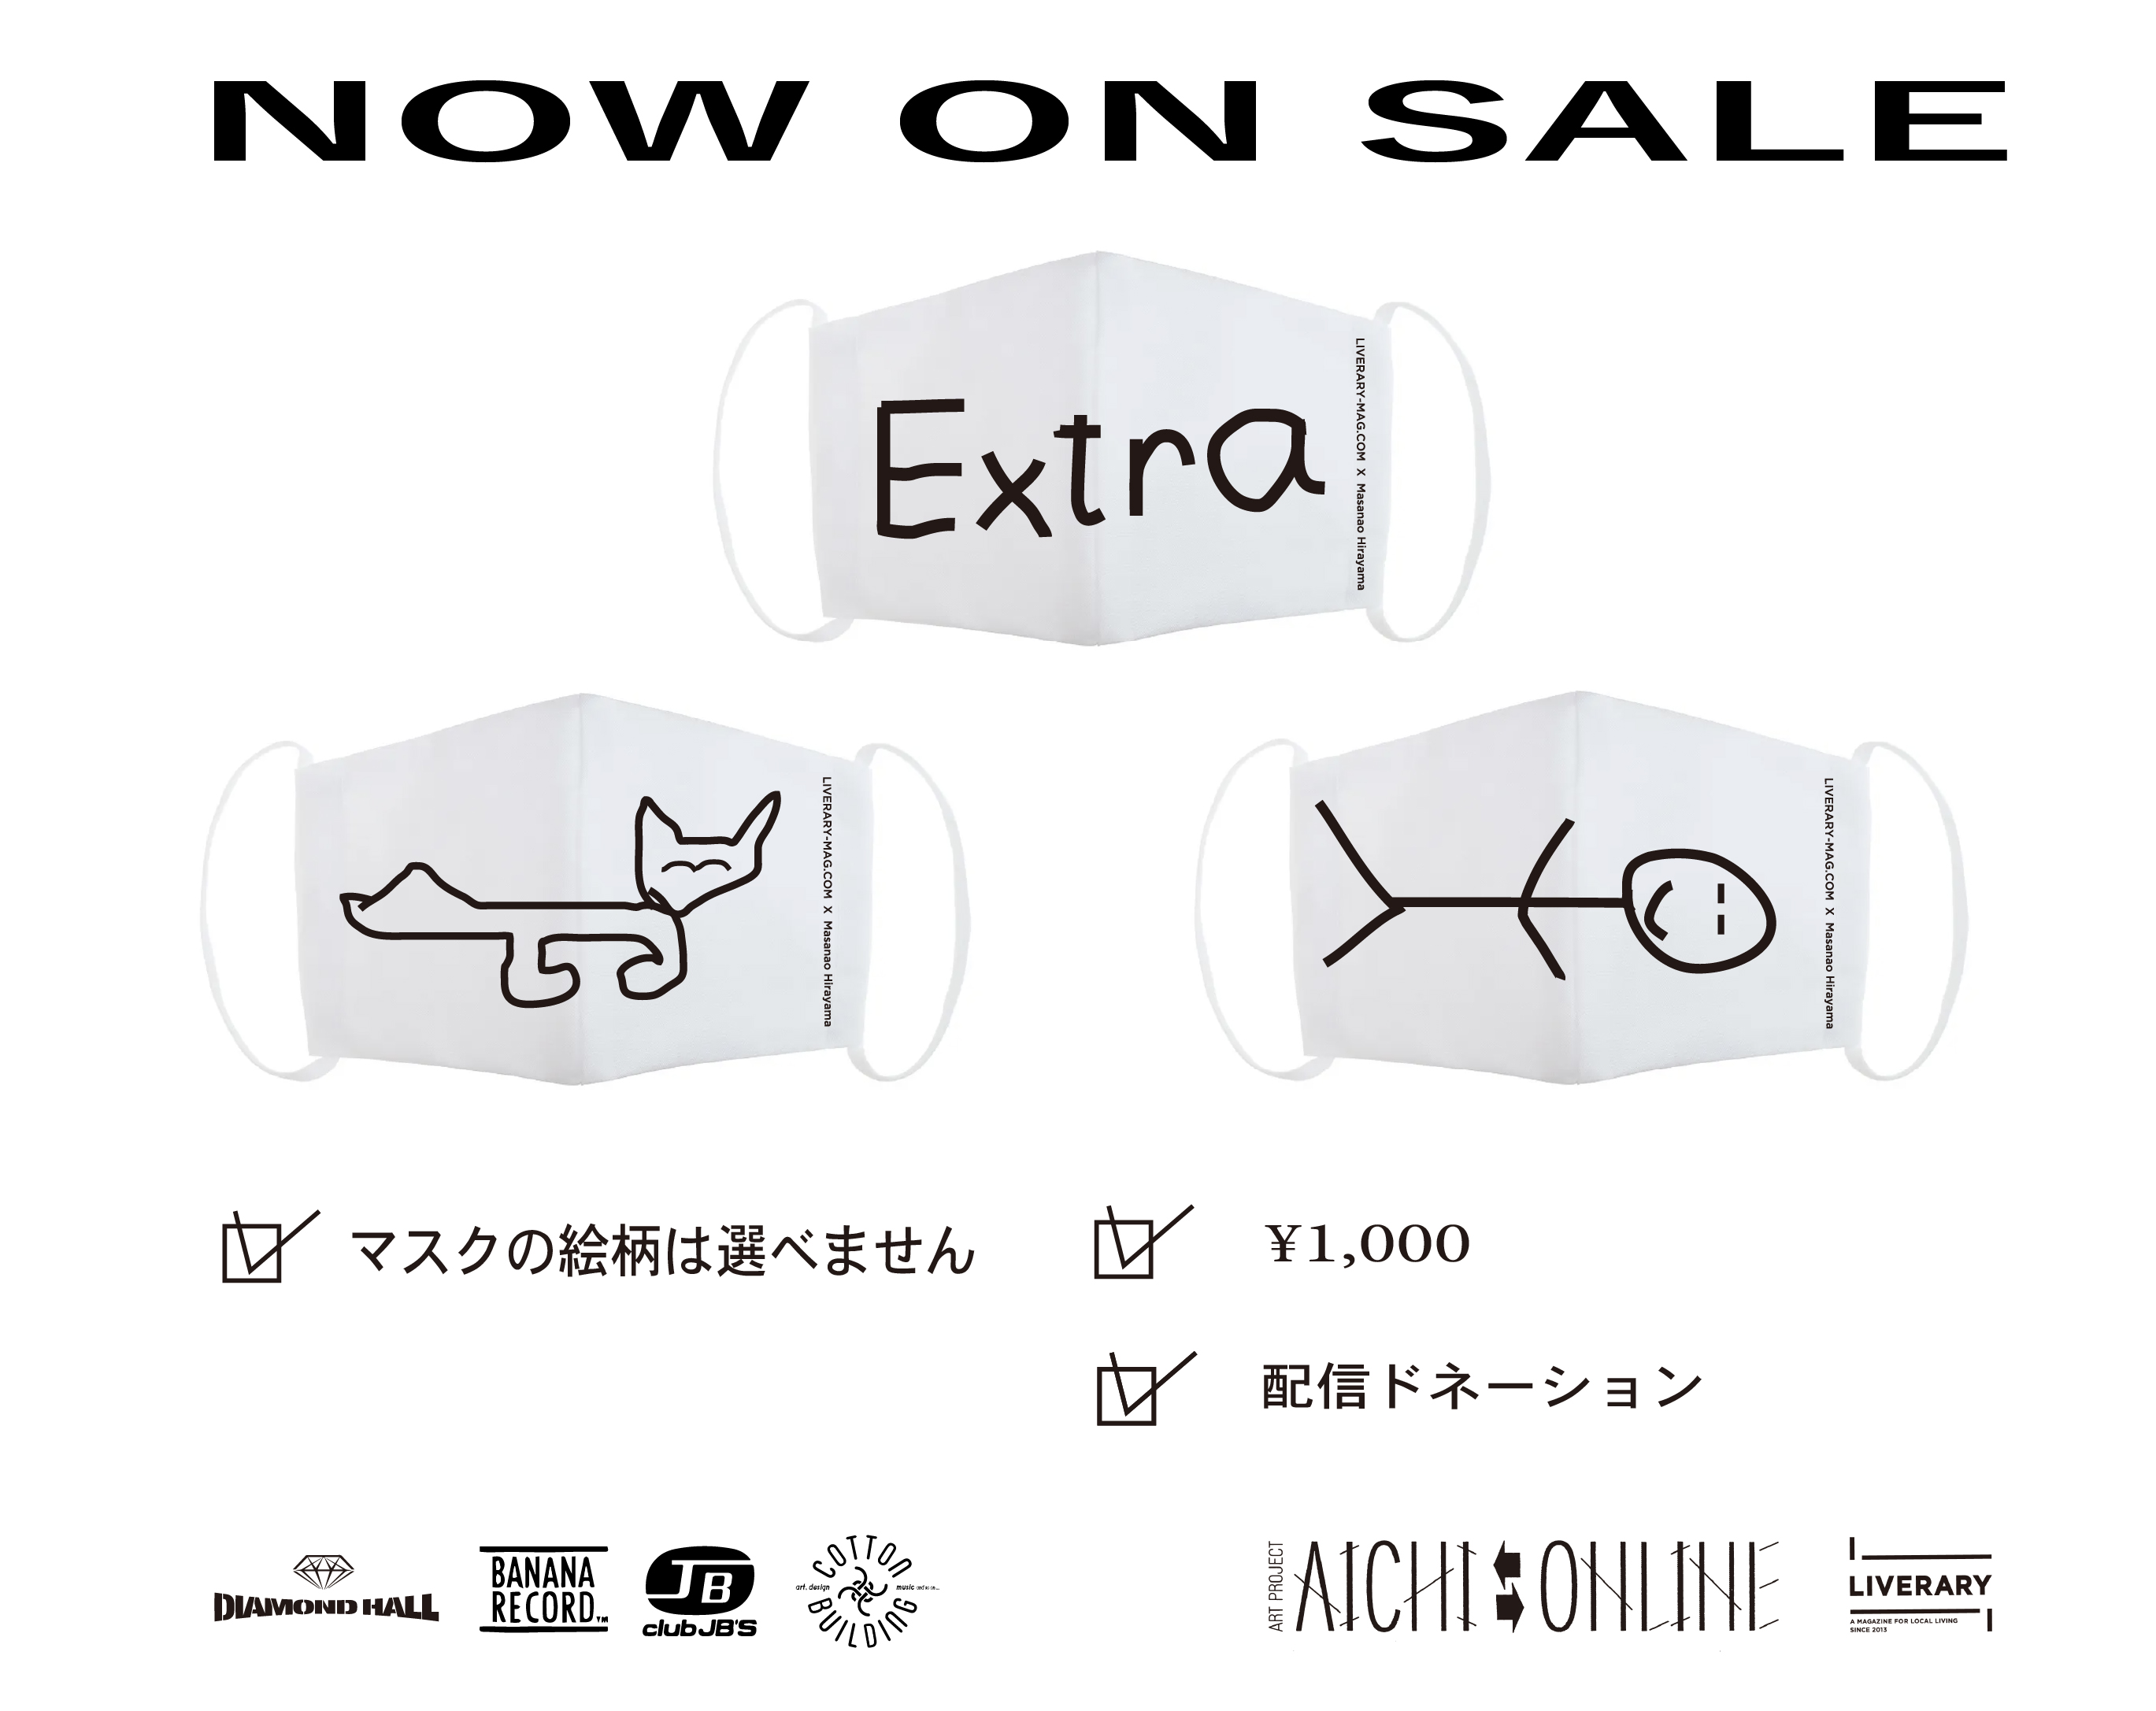 NOW ON SALE